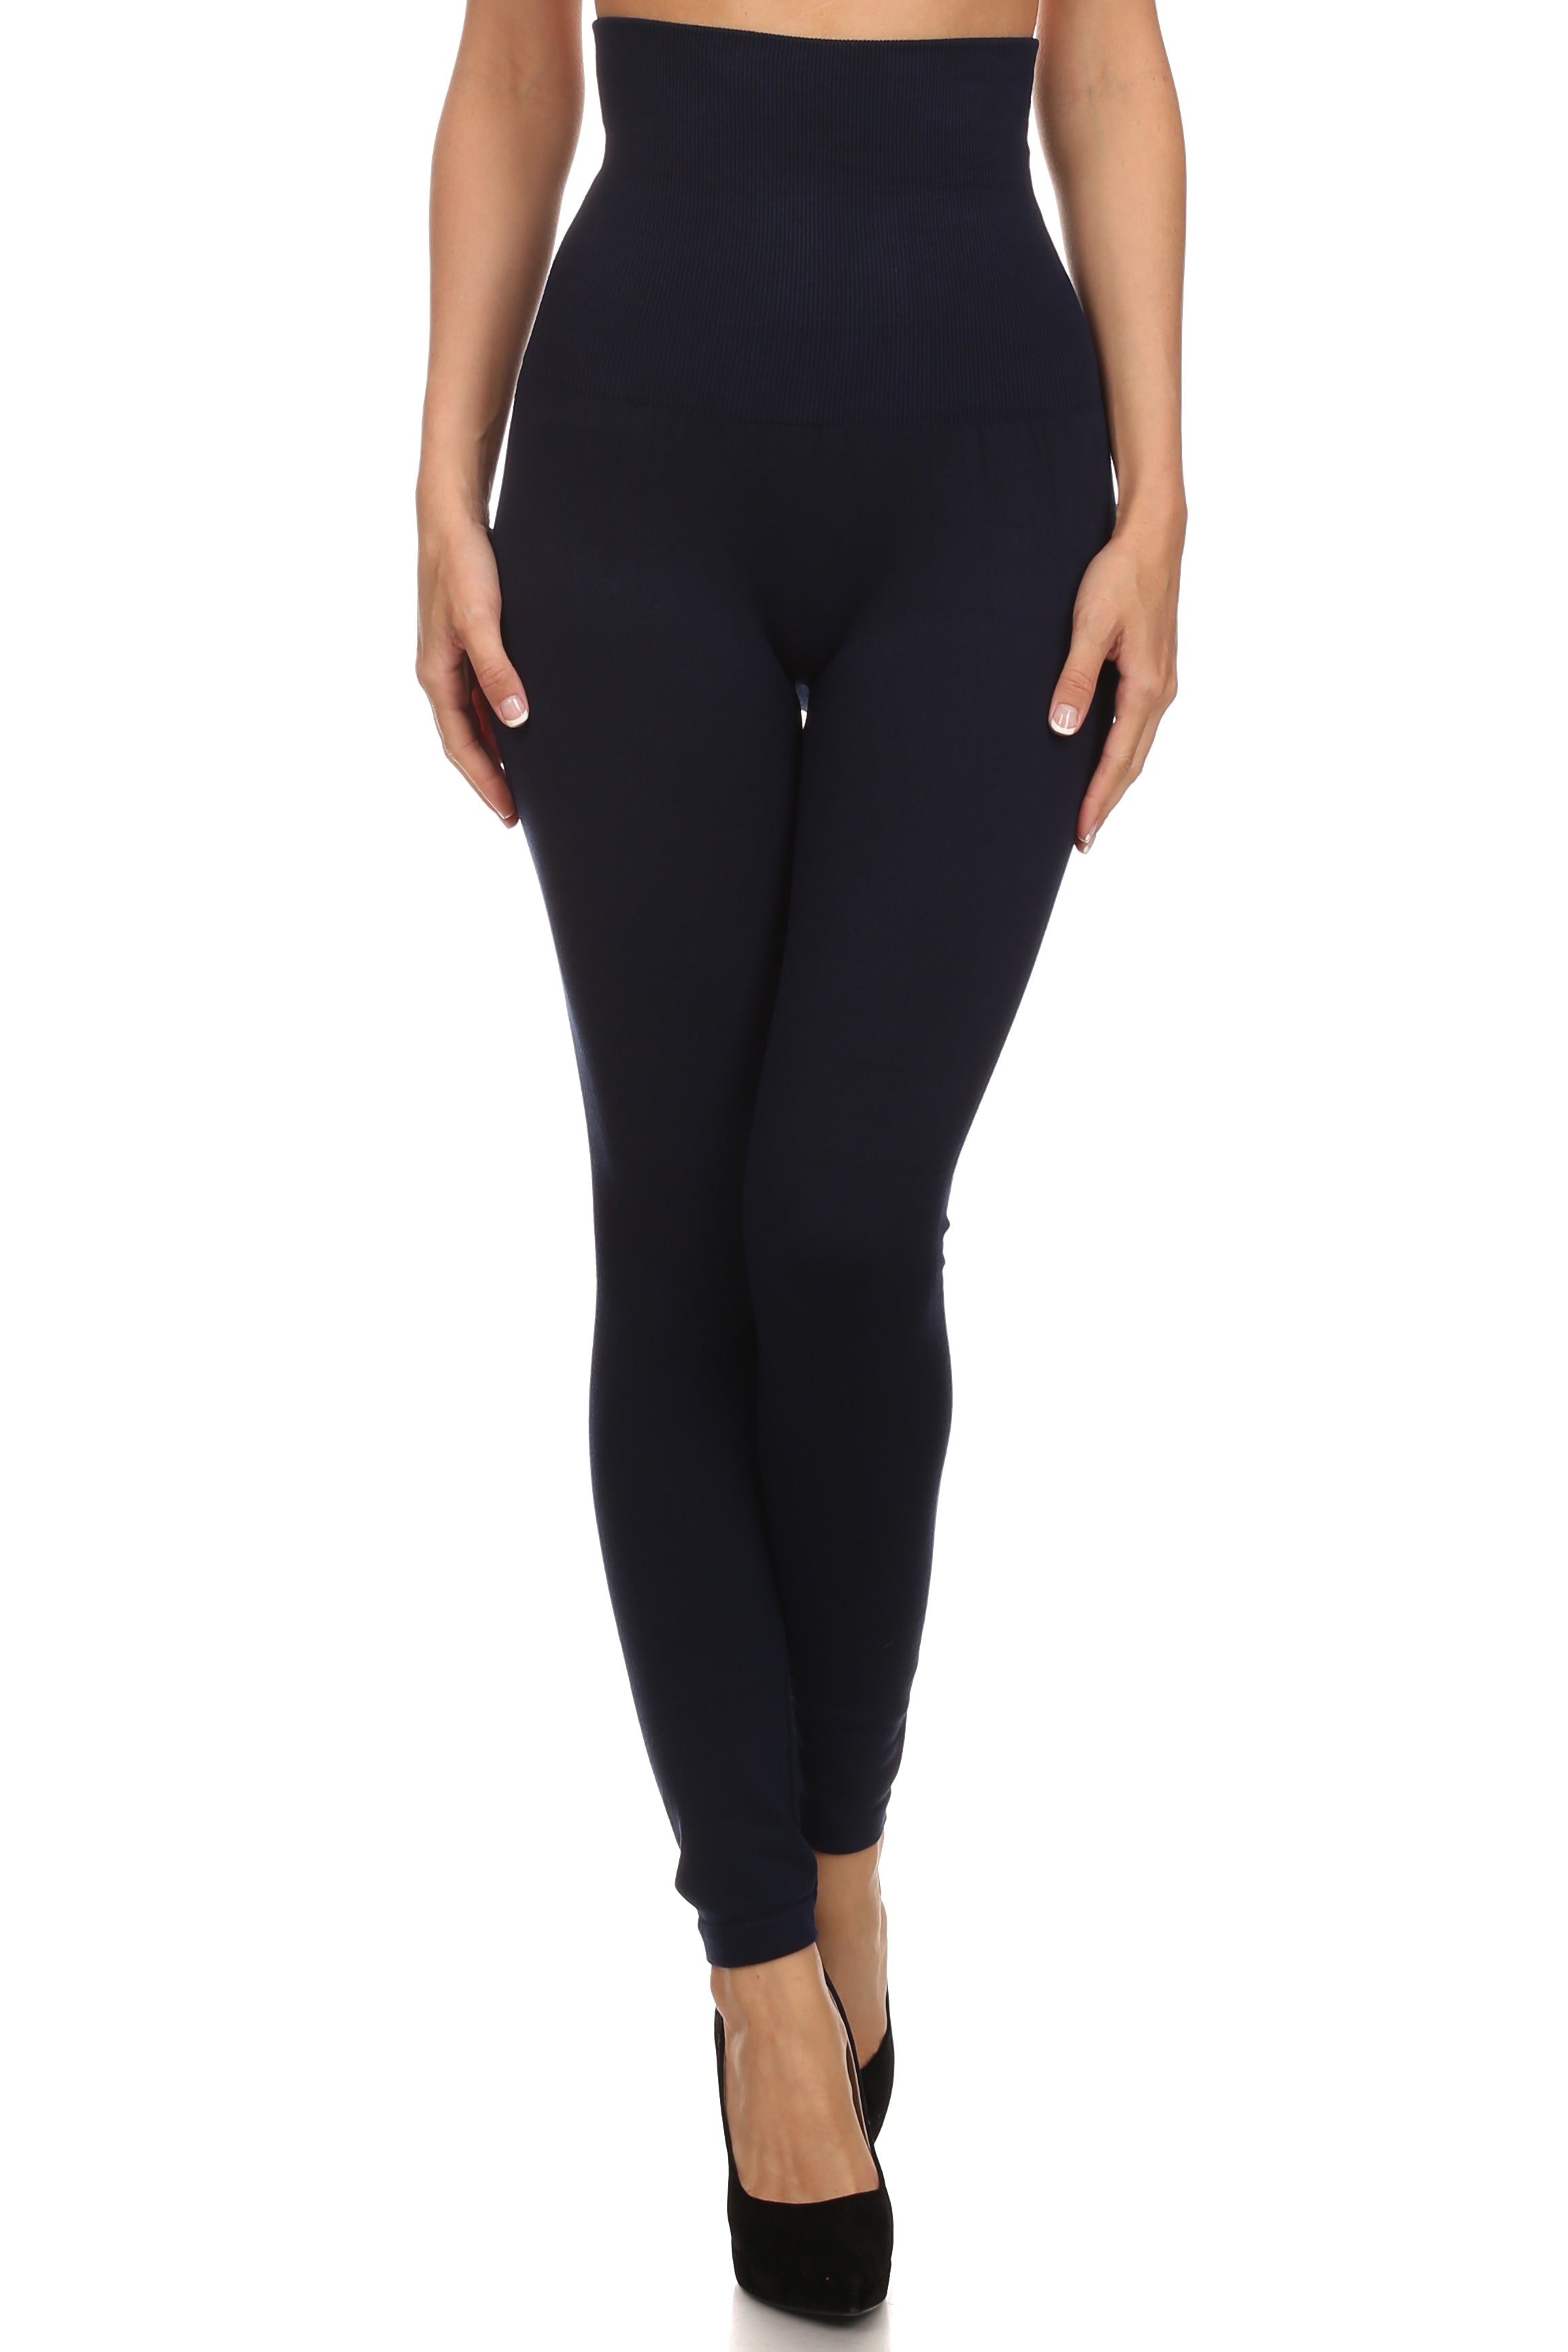 High Waisted Compression Leggings for Women